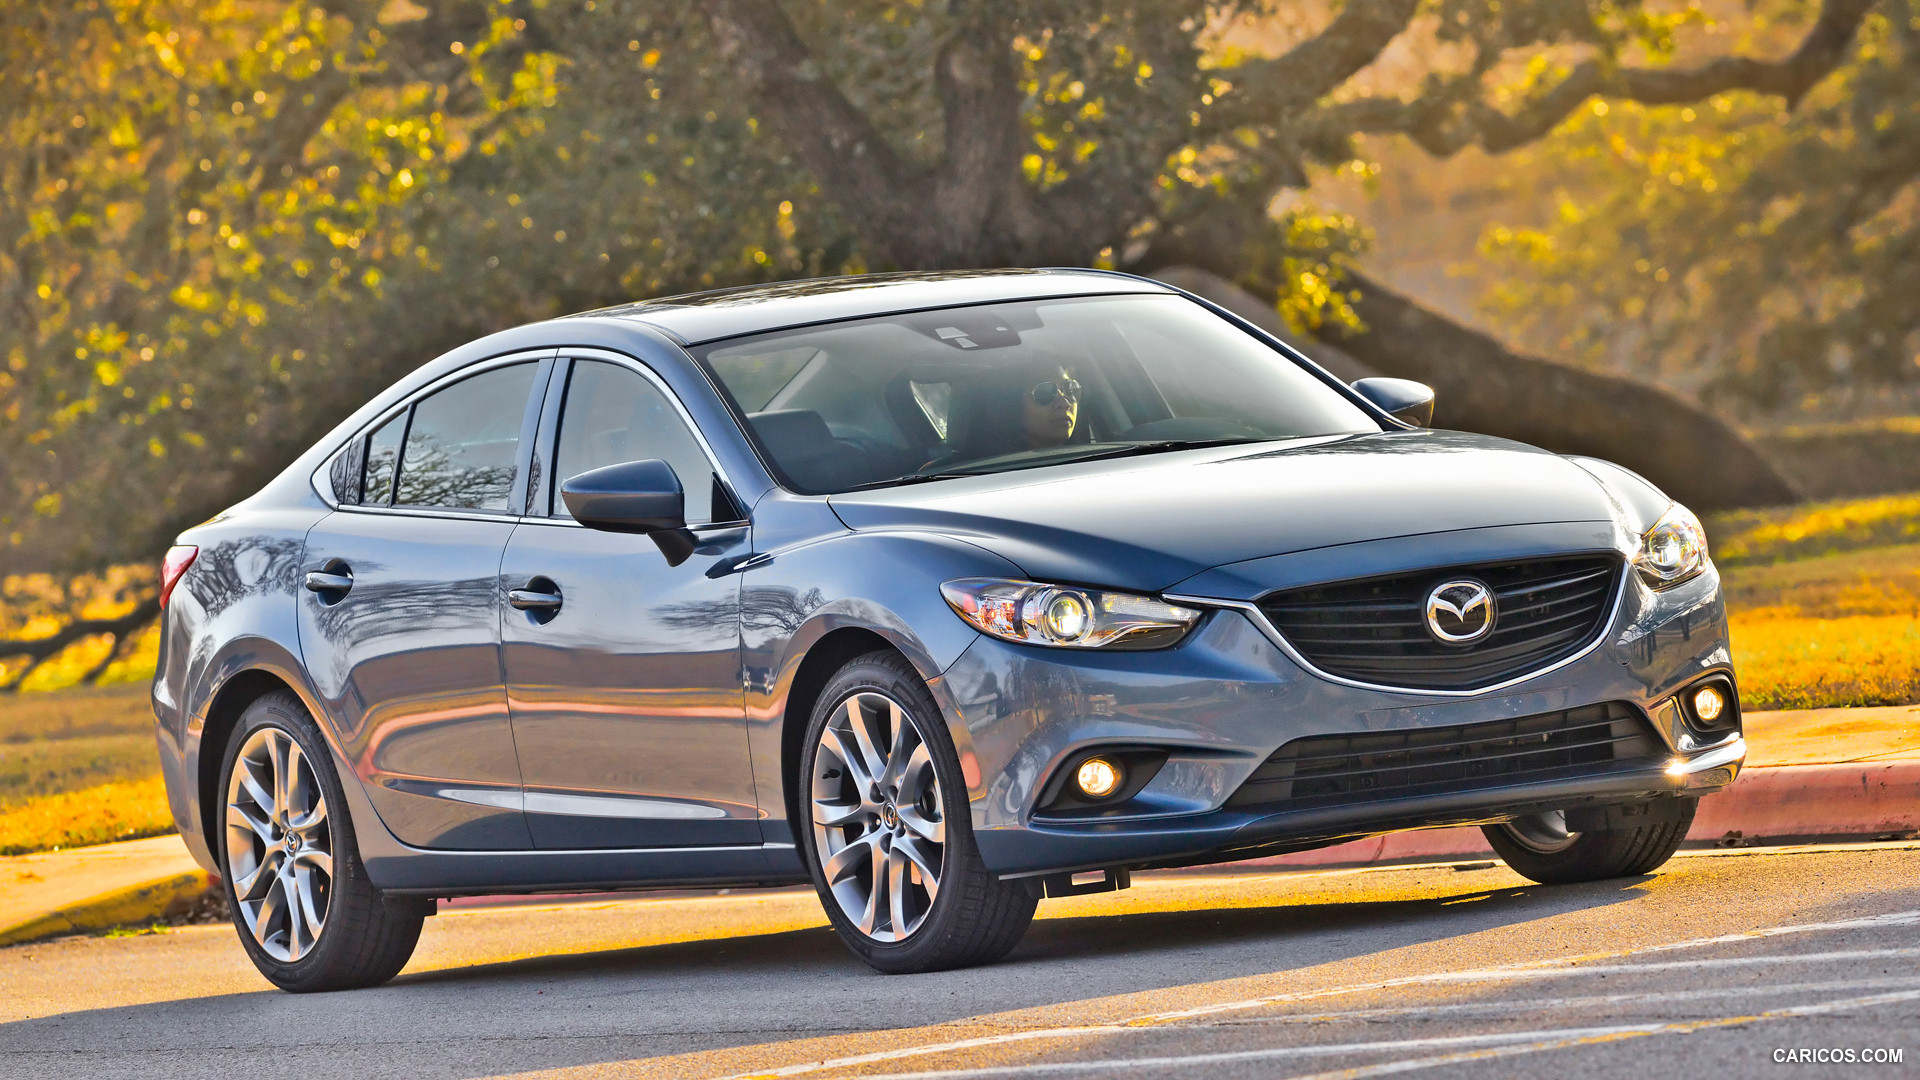 2014 Mazda6 GT - Front, #142 of 179